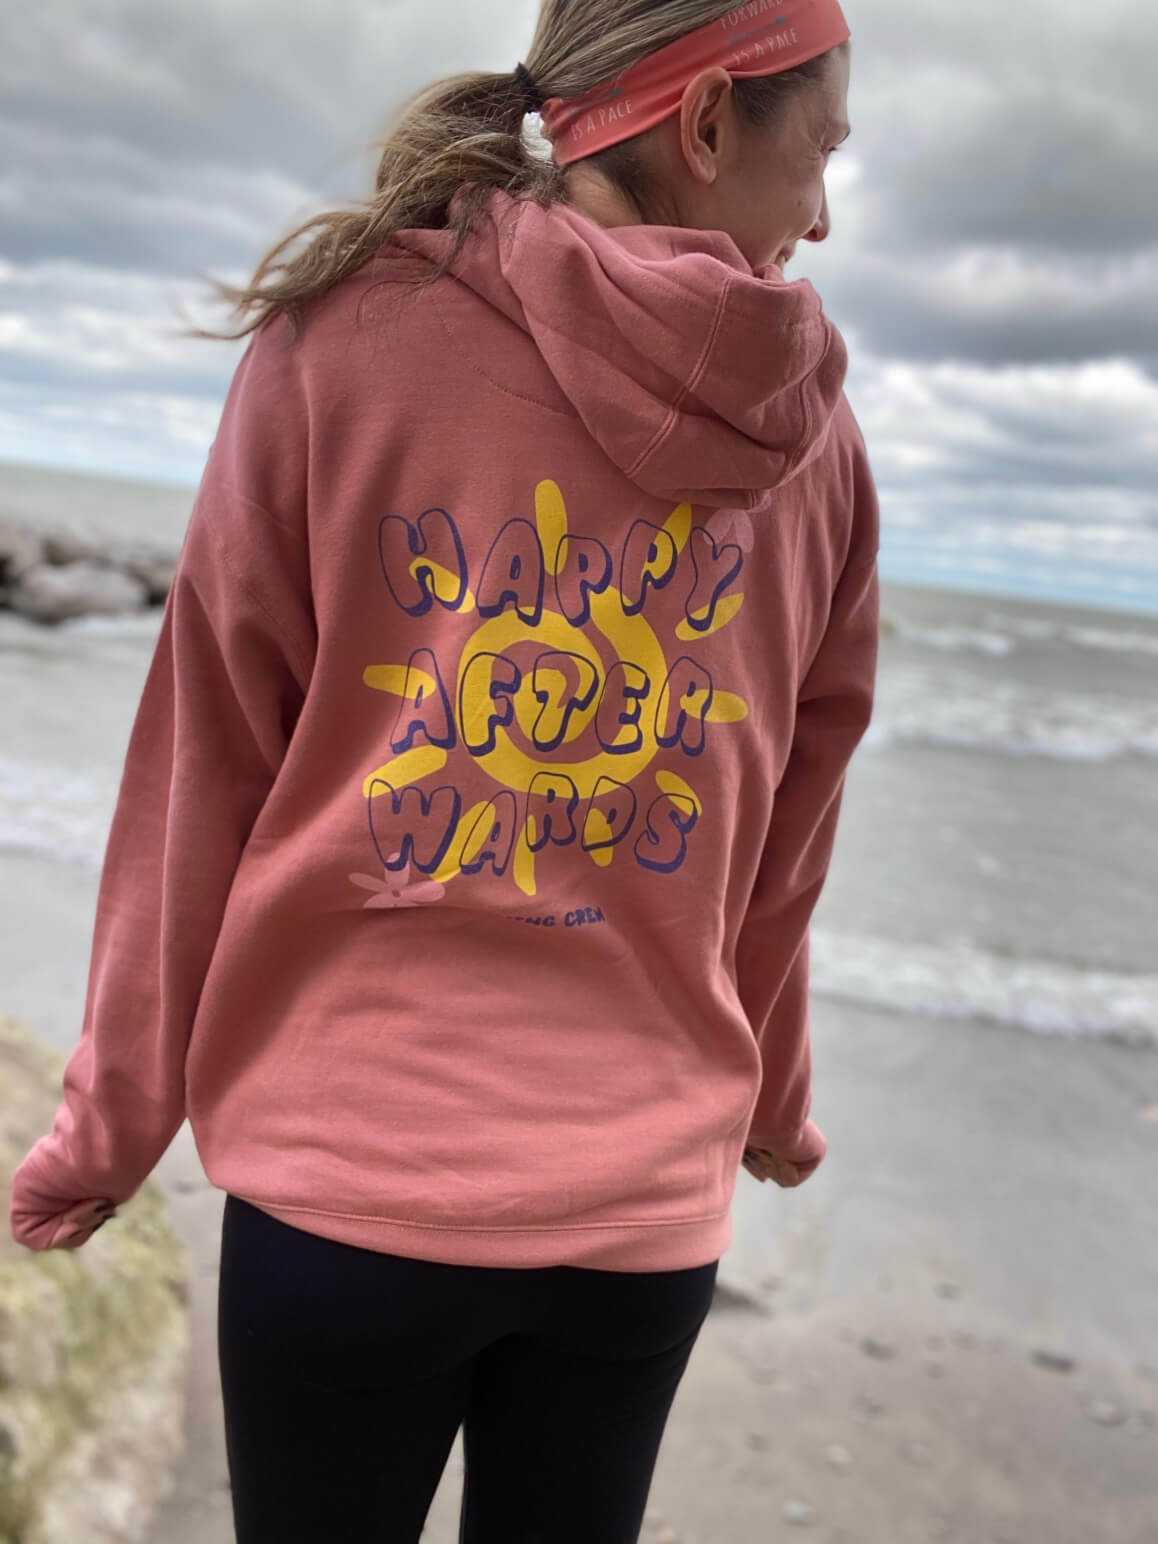 Happy Afterwards Running Crew Women's Fitted Hoodie